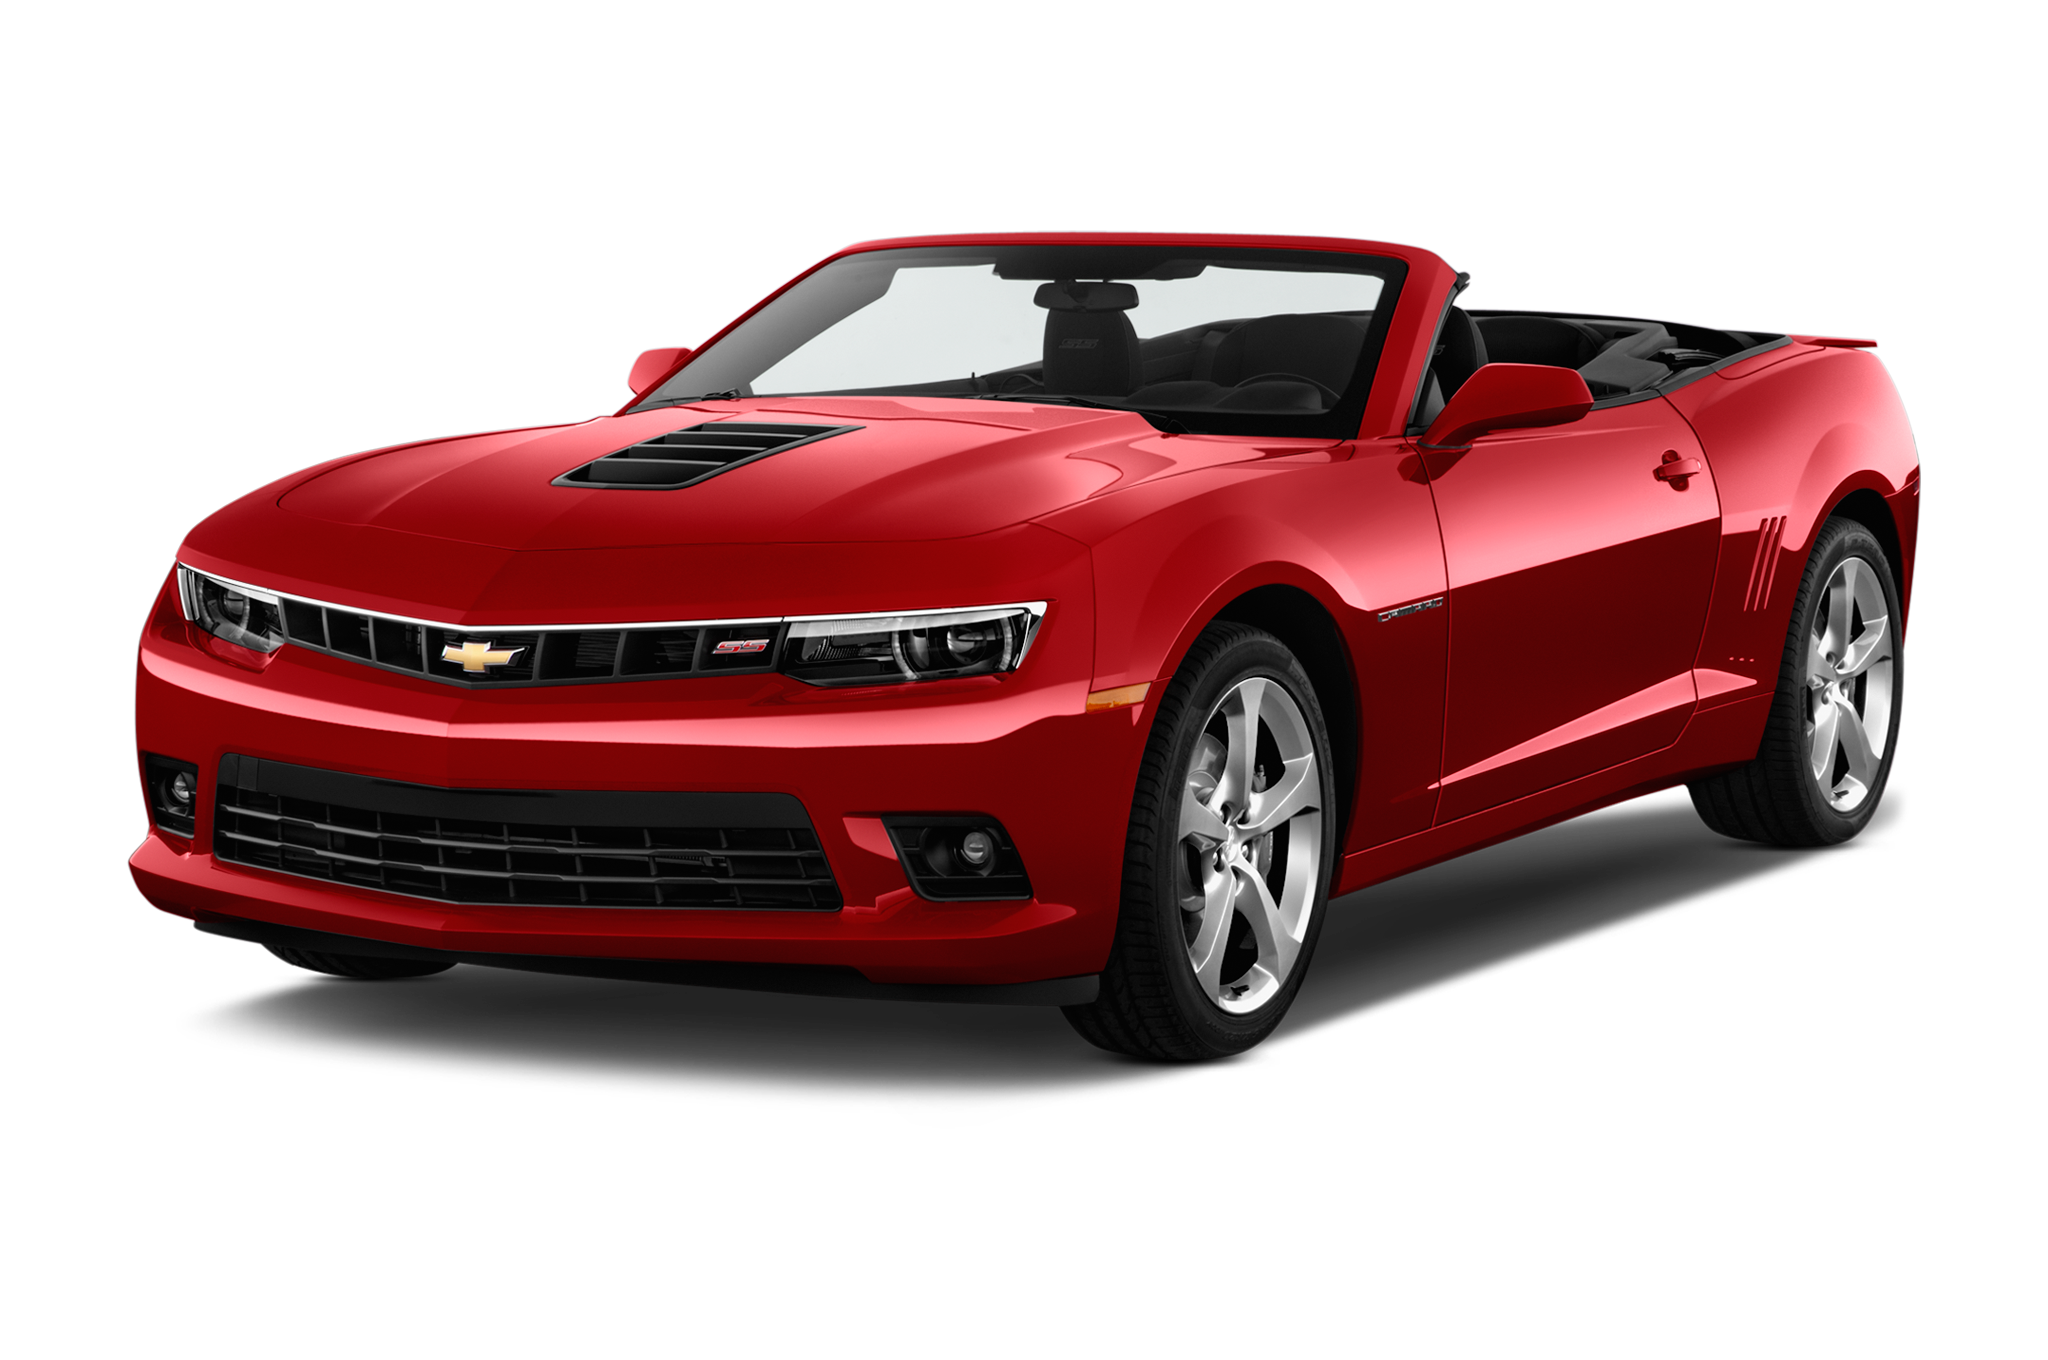 2014 Chevrolet Camaro 6.2 Convertible 2SS Specs and